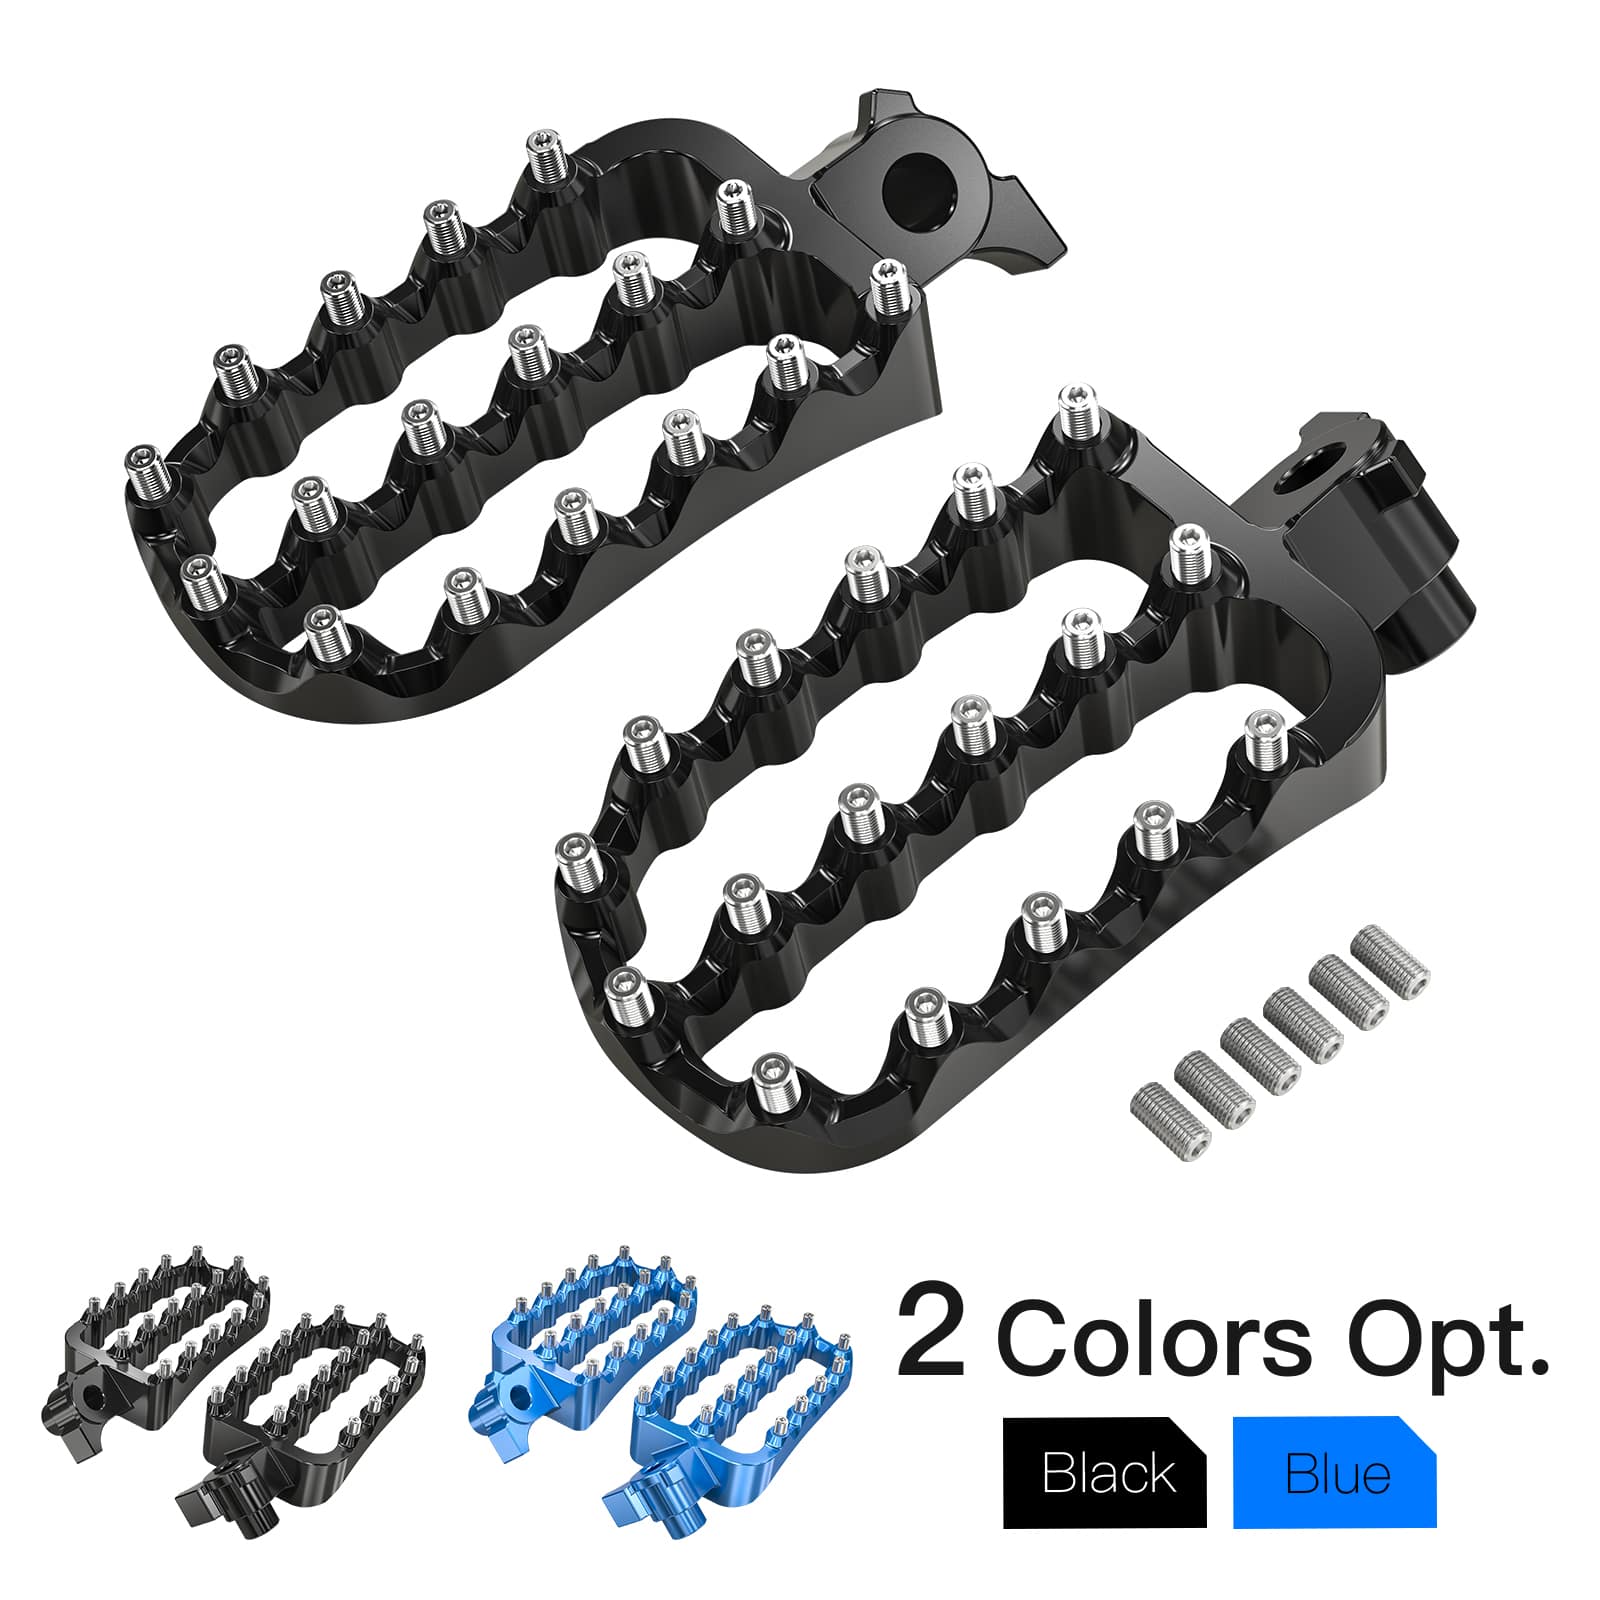 Motorcycle Yamaha Parts | Off Road Bike Accessories